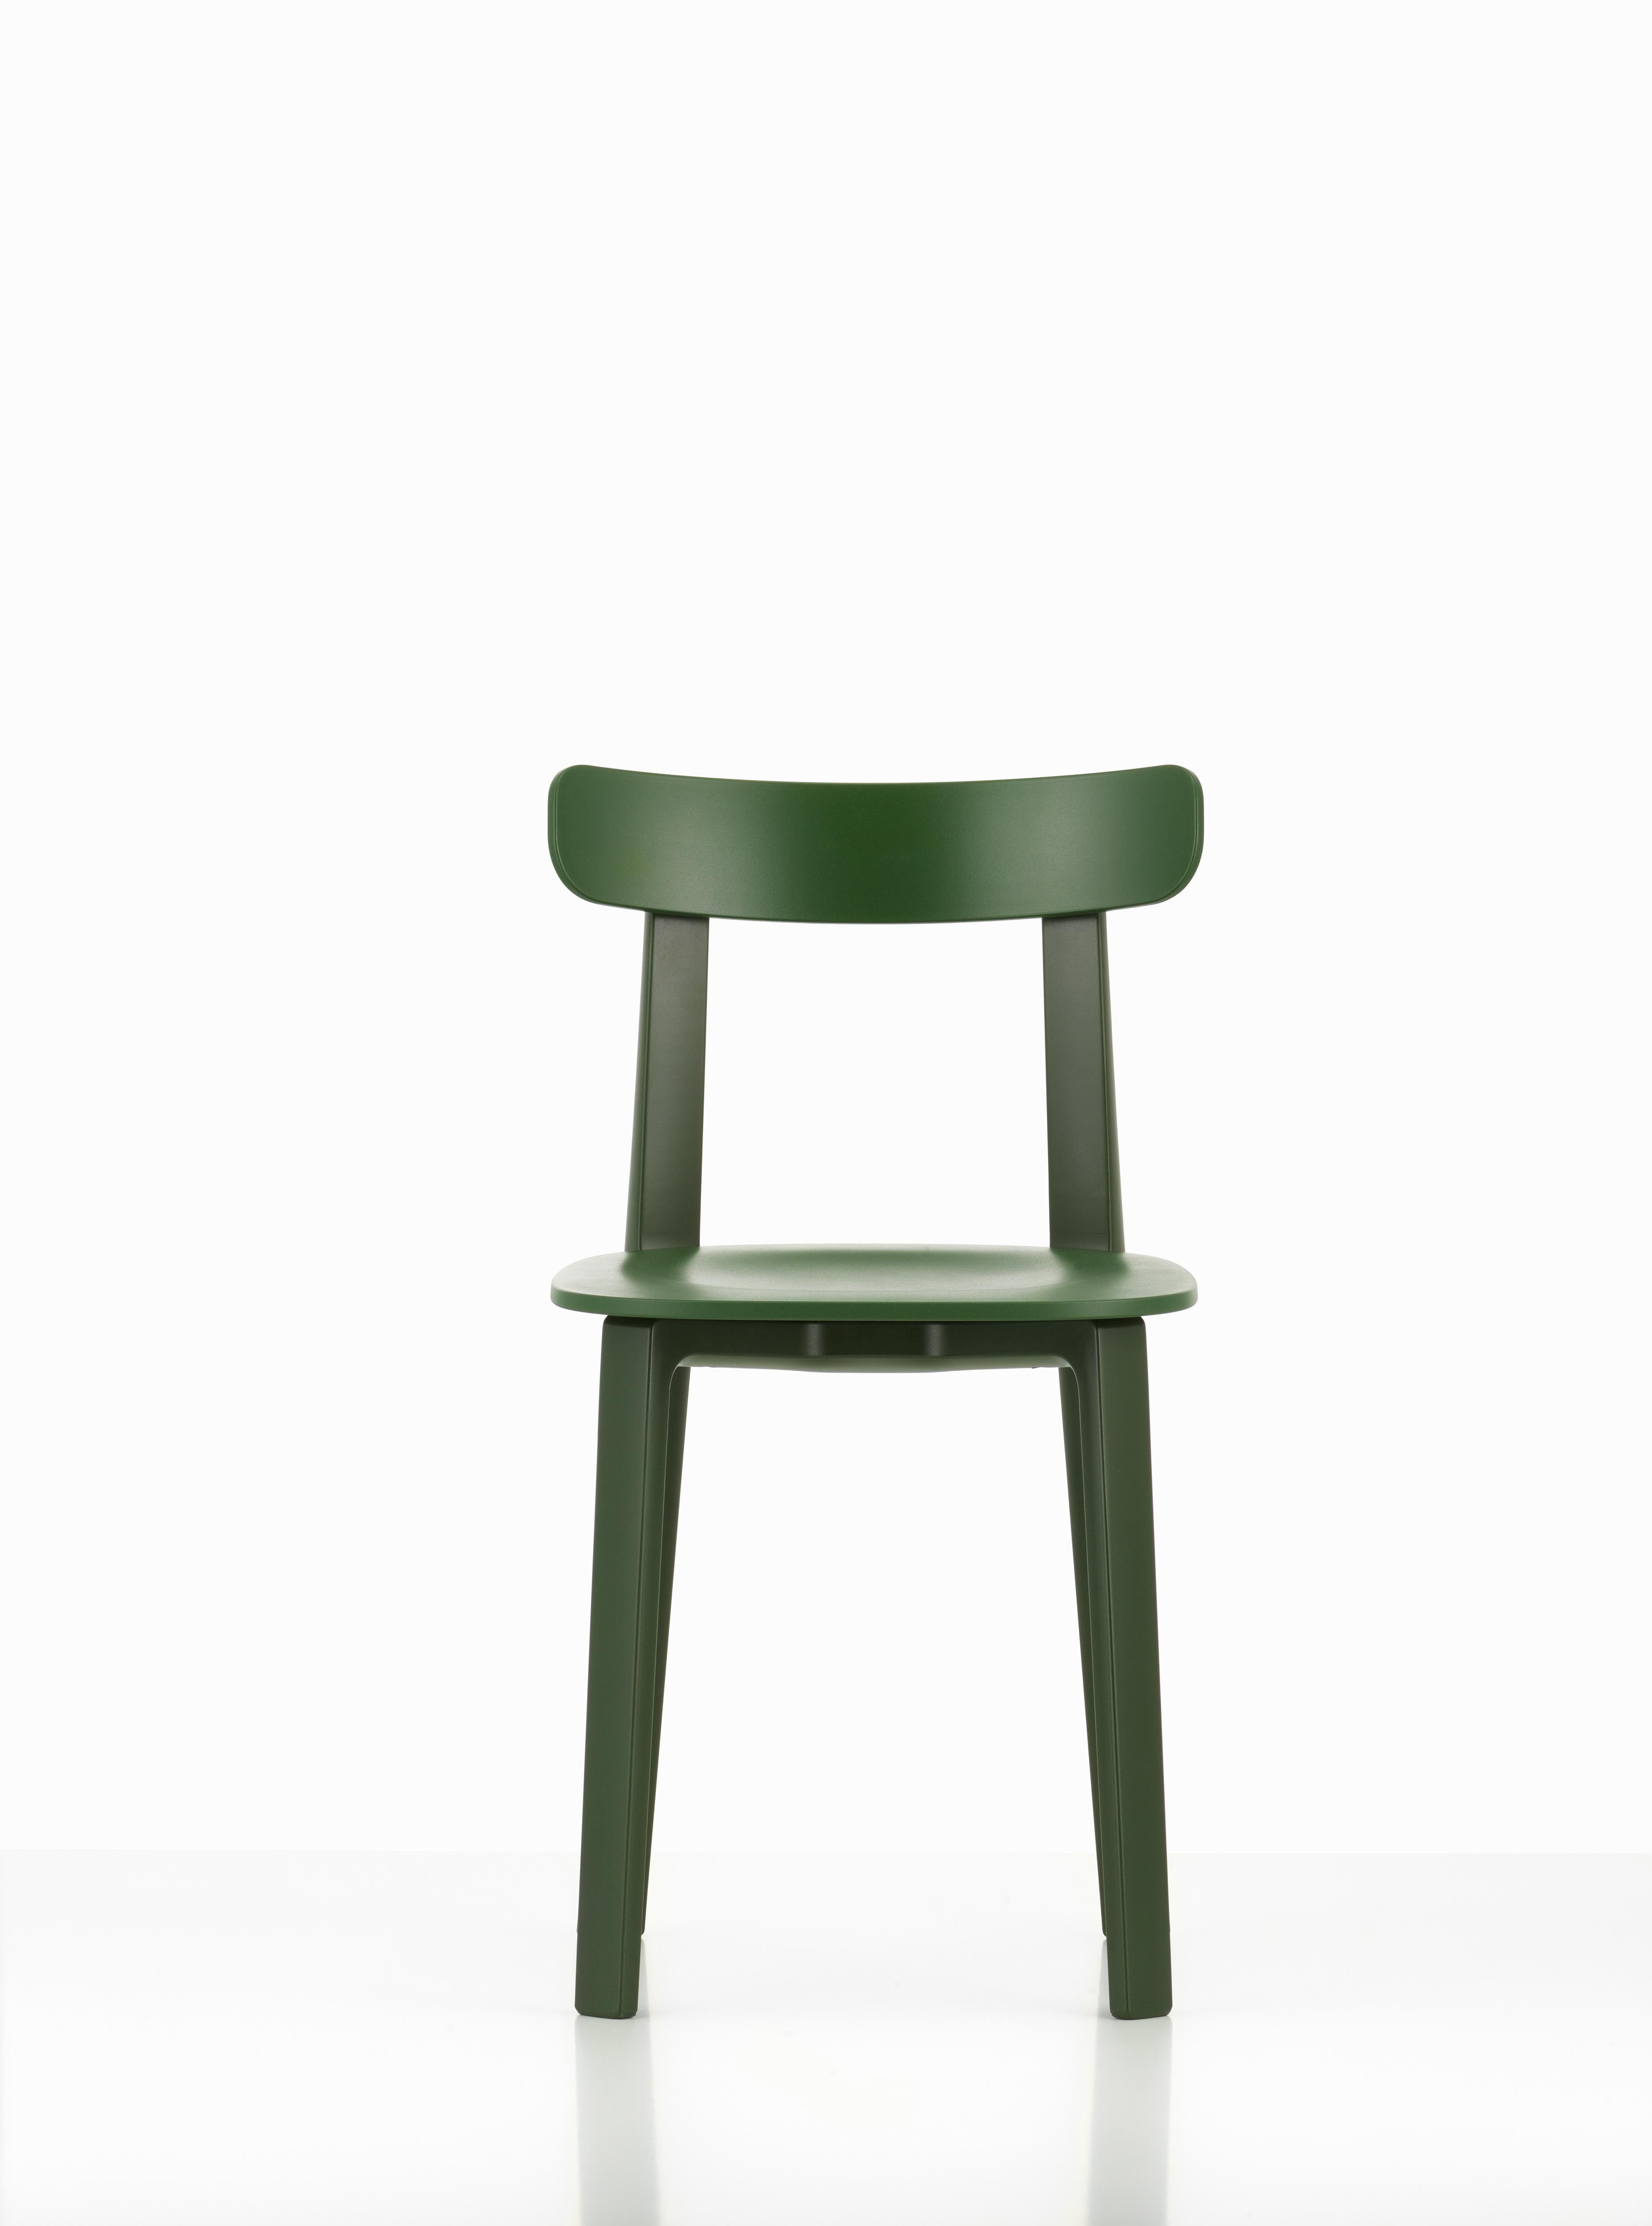 These products are only available in the United States.

At first glance, the All Plastic chair is reminiscent of the simple, classic wooden chairs that have been familiar in Europe for many decades. Utilizing a new material, the chair represents a